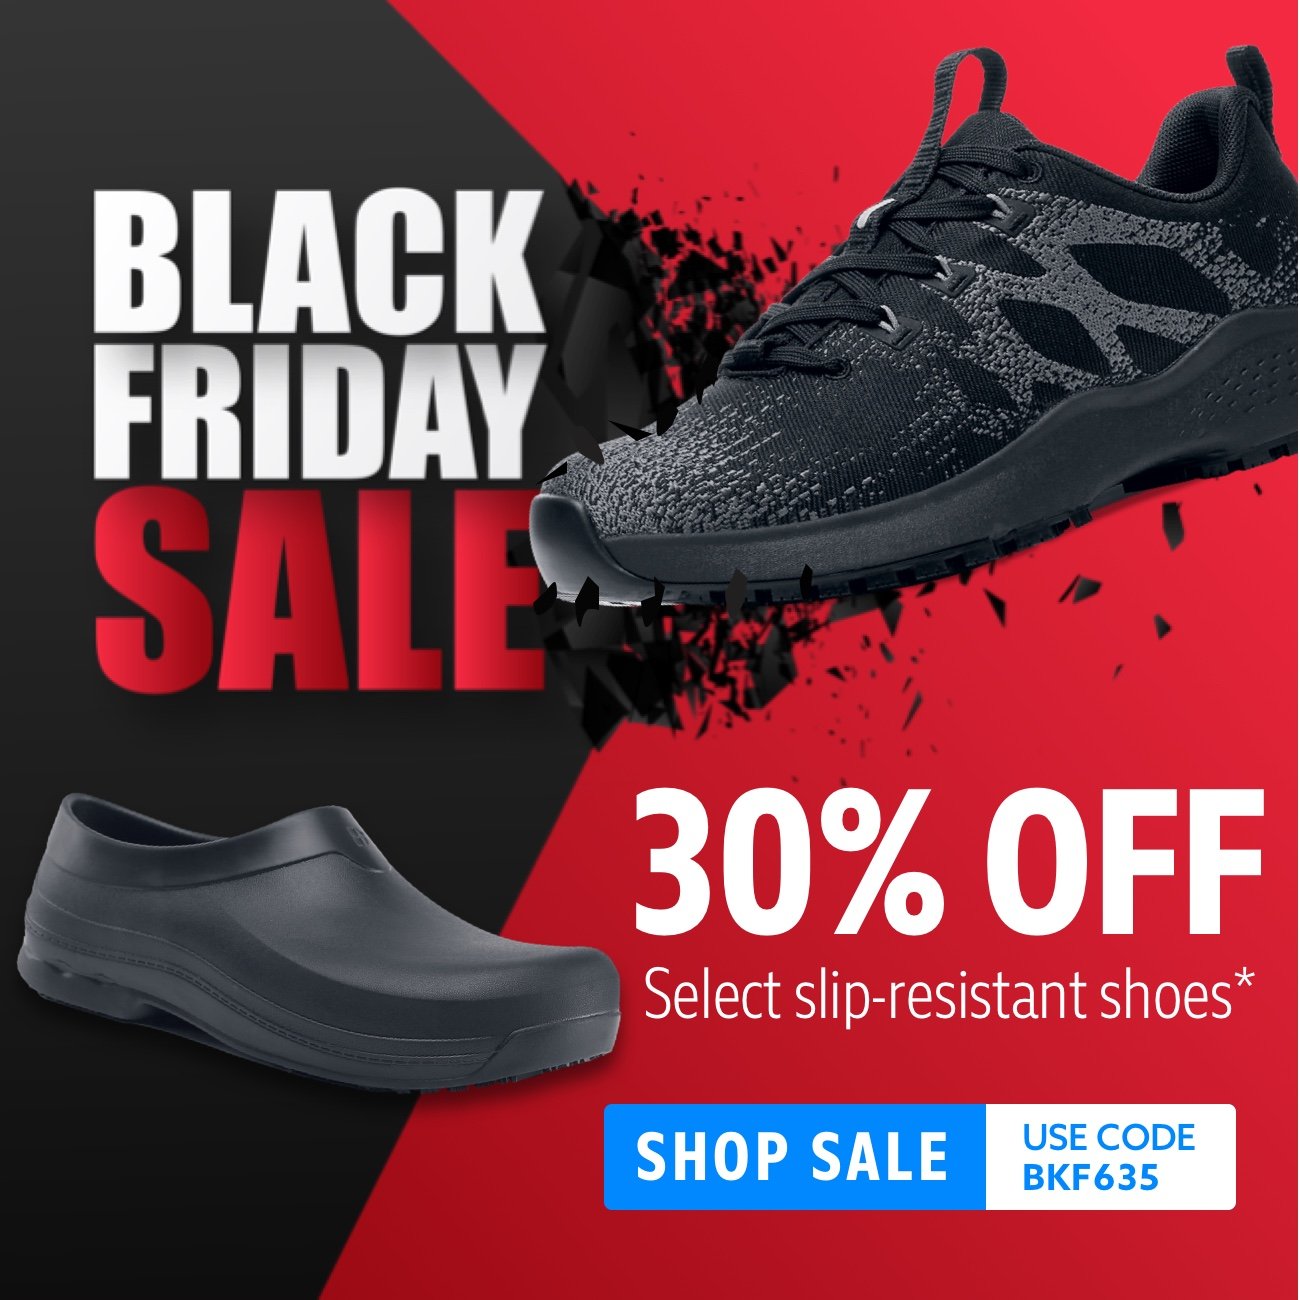 Black Friday 30% Off Select Slip-Resistant Styles. Use code BKF635.